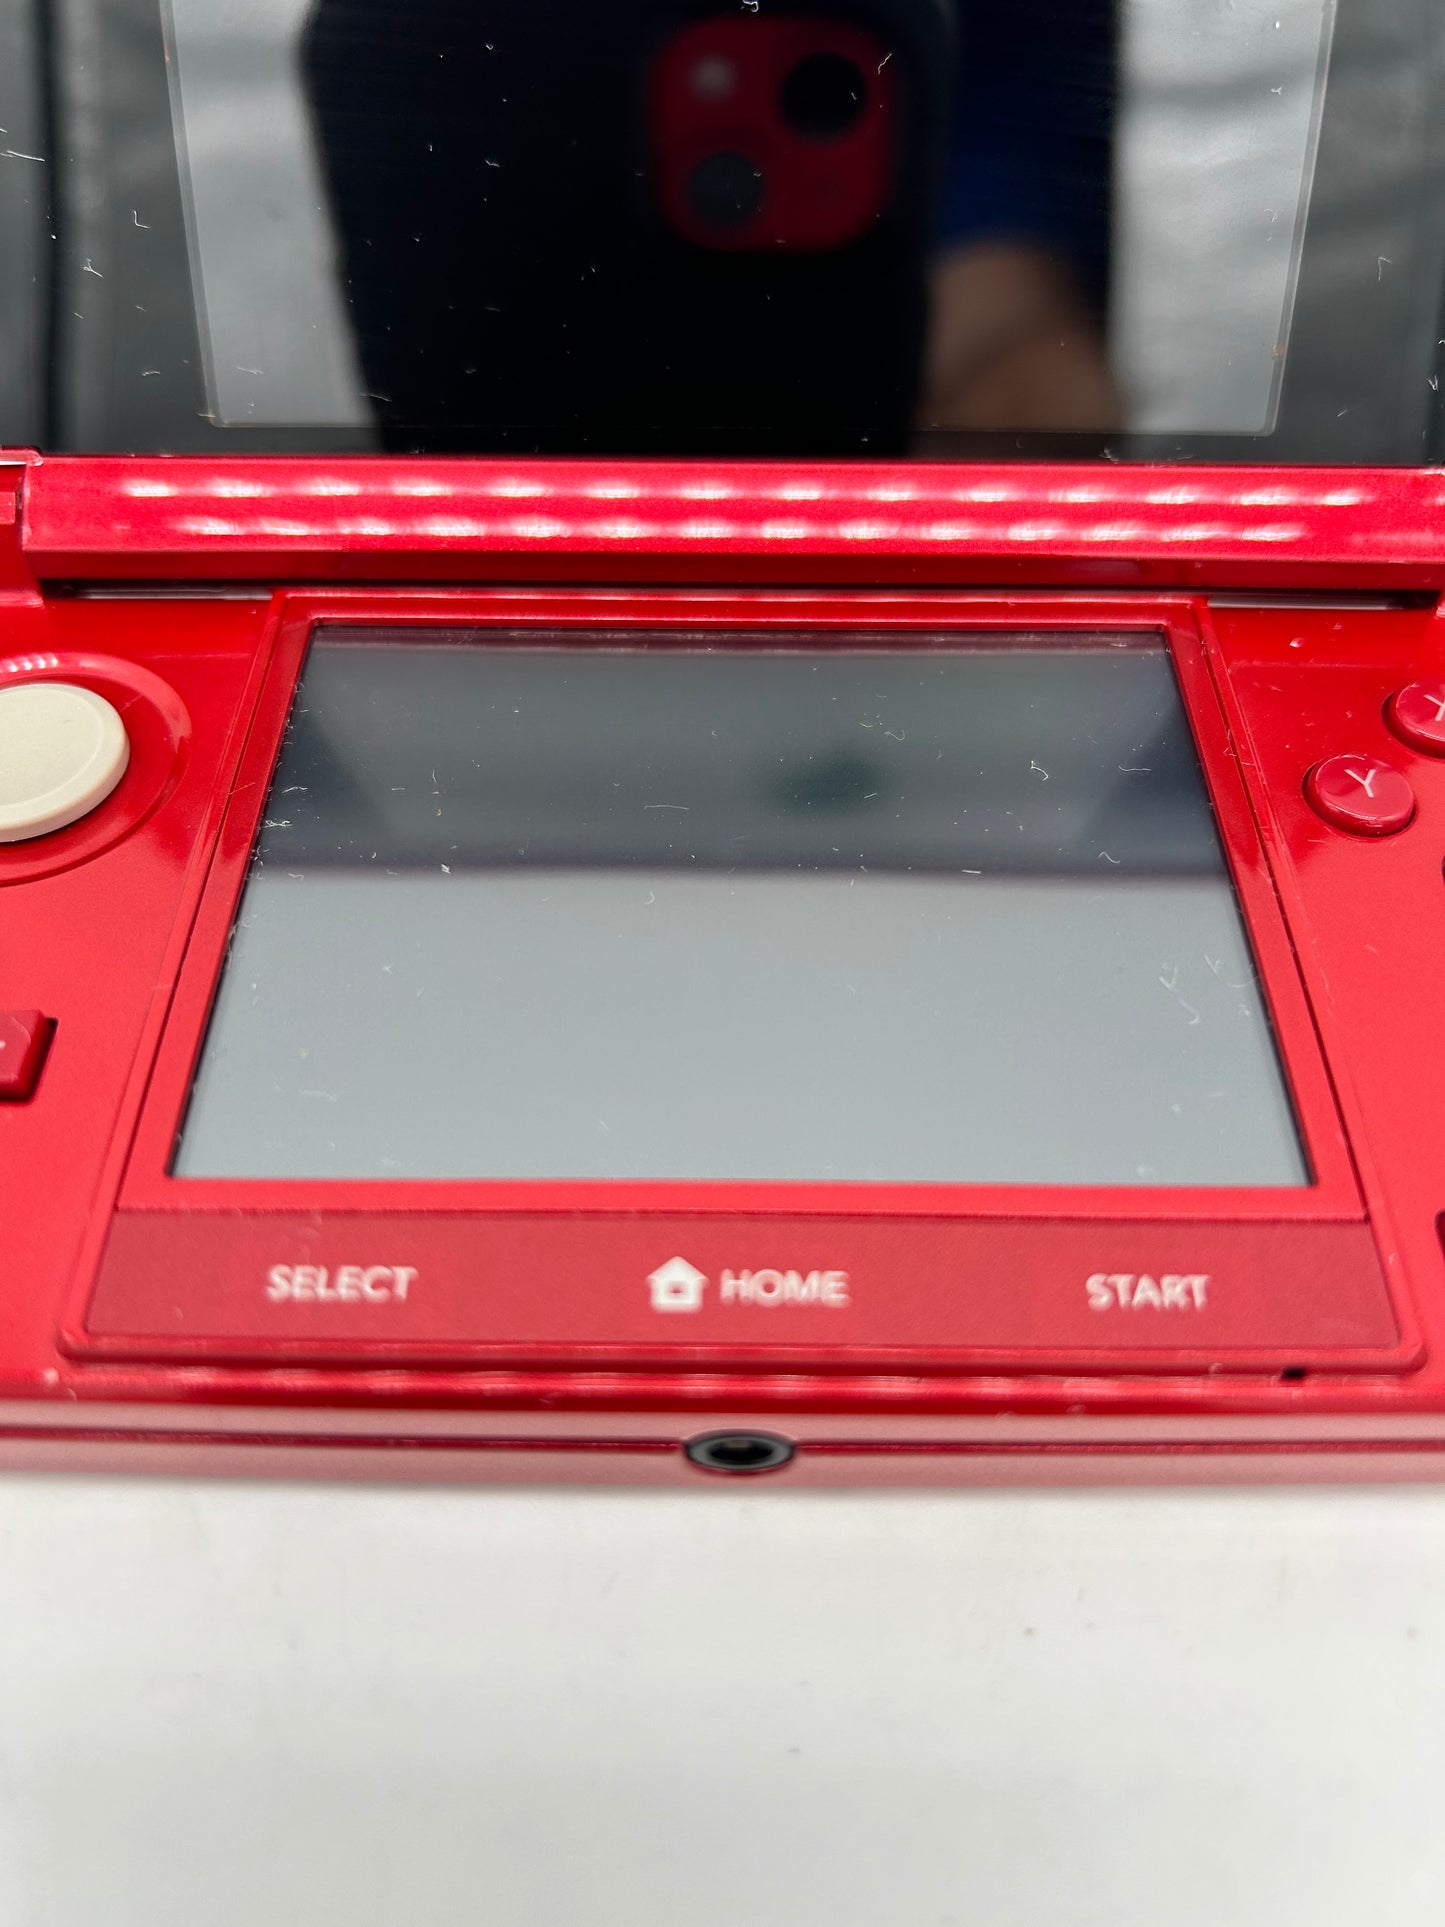 NiNTENDO 3DS CONSOLE | MODEL ROUGE FLAMME RED CTR-001(USA)